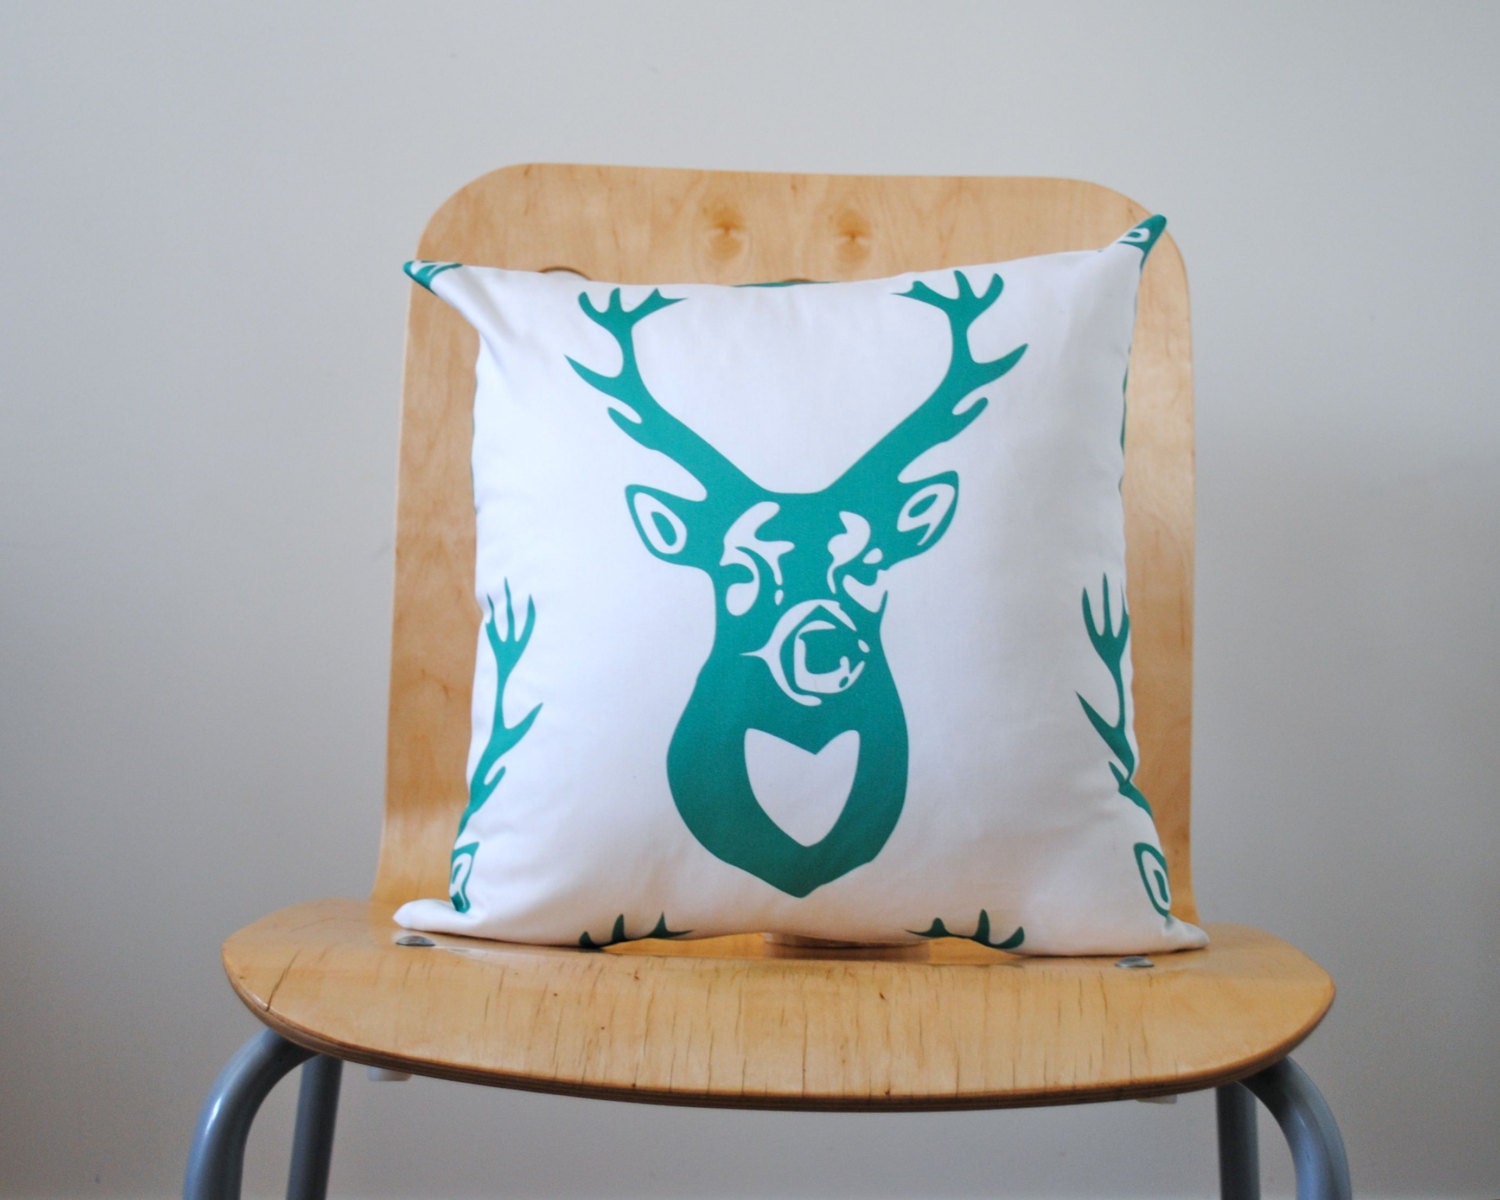 Organic Pillow Sham Cover in Emerald Green - DEER ANTLERS - Throw Pillow - Woodland Accent Cushion - Rustic Fall Home Decor - SewnNatural